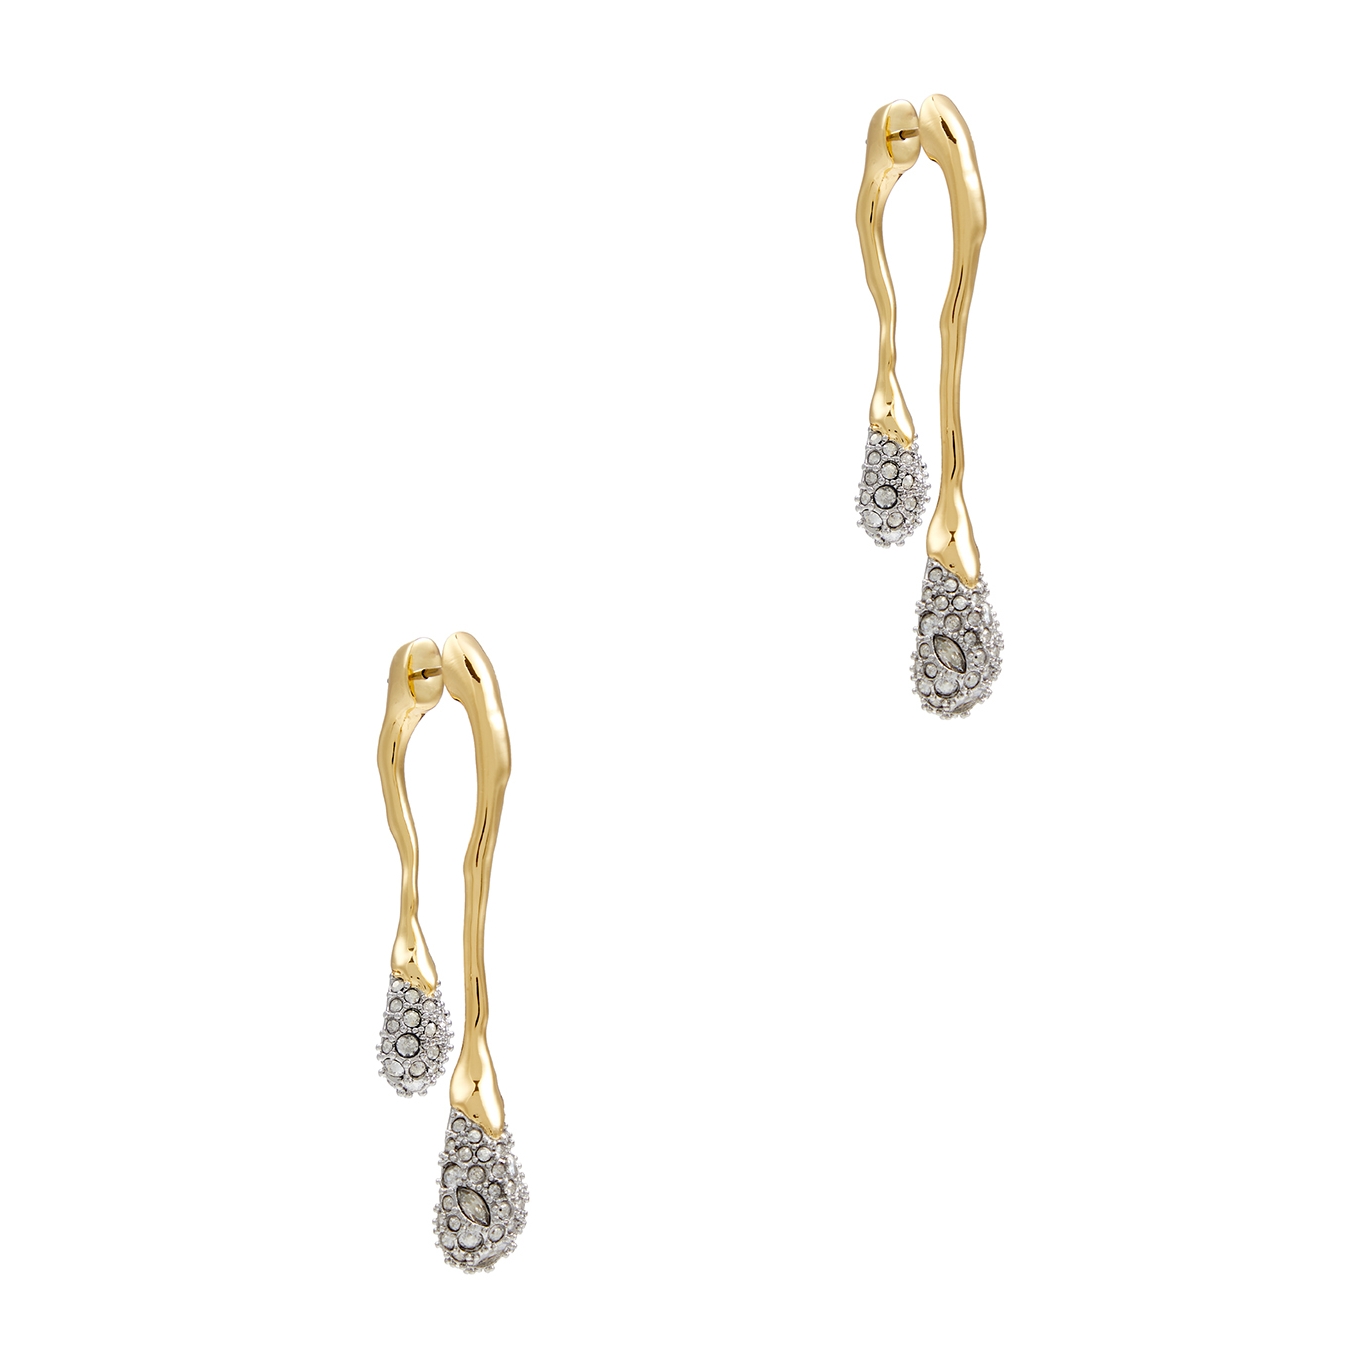 Alexis Bittar Solanales 14kt Gold-plated Double Drop Earrings